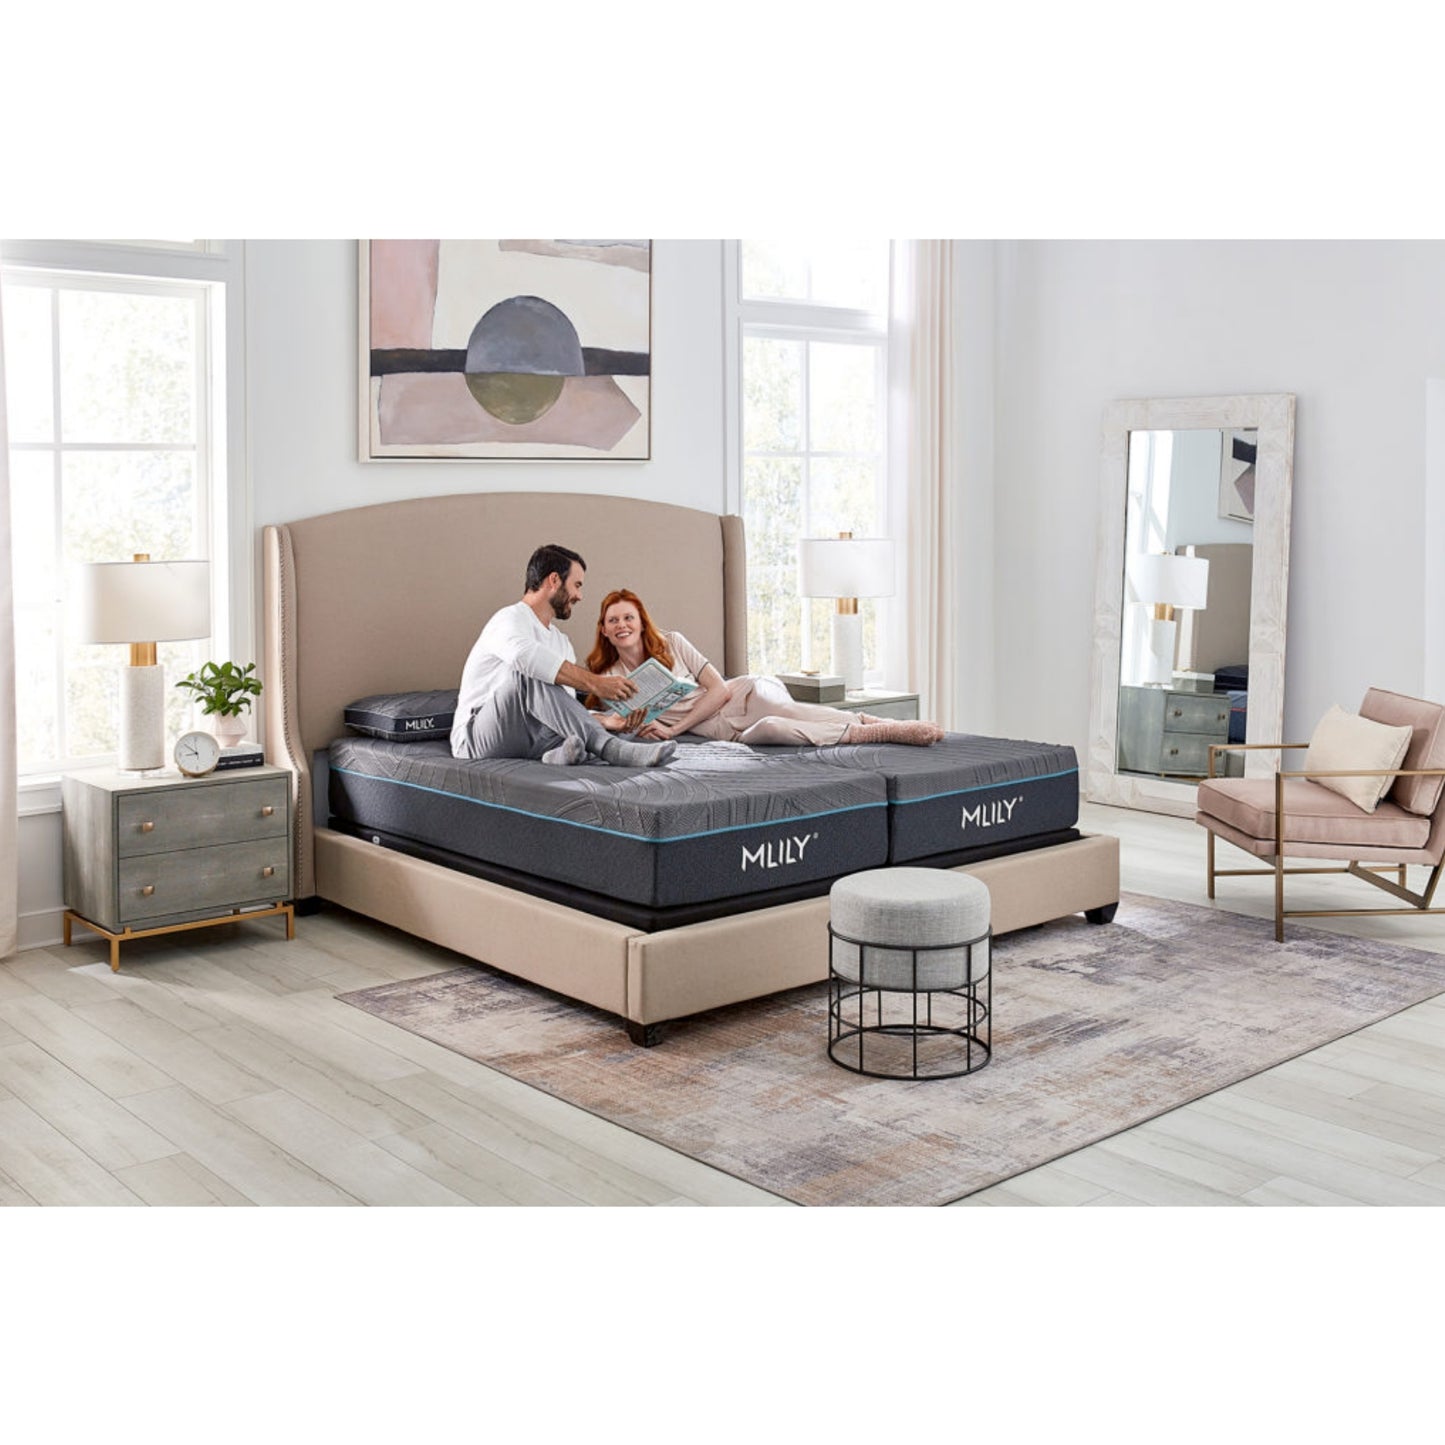 Firm PowerCool 11.5" Hybrid Mattress With Ventilated Memory Foam Pillow(s) And Adjustable Base Featuring Integrated Cooling Fans Inside Of A Bedroom With Man And Woman Enjoying Each Other's Company, Corner View